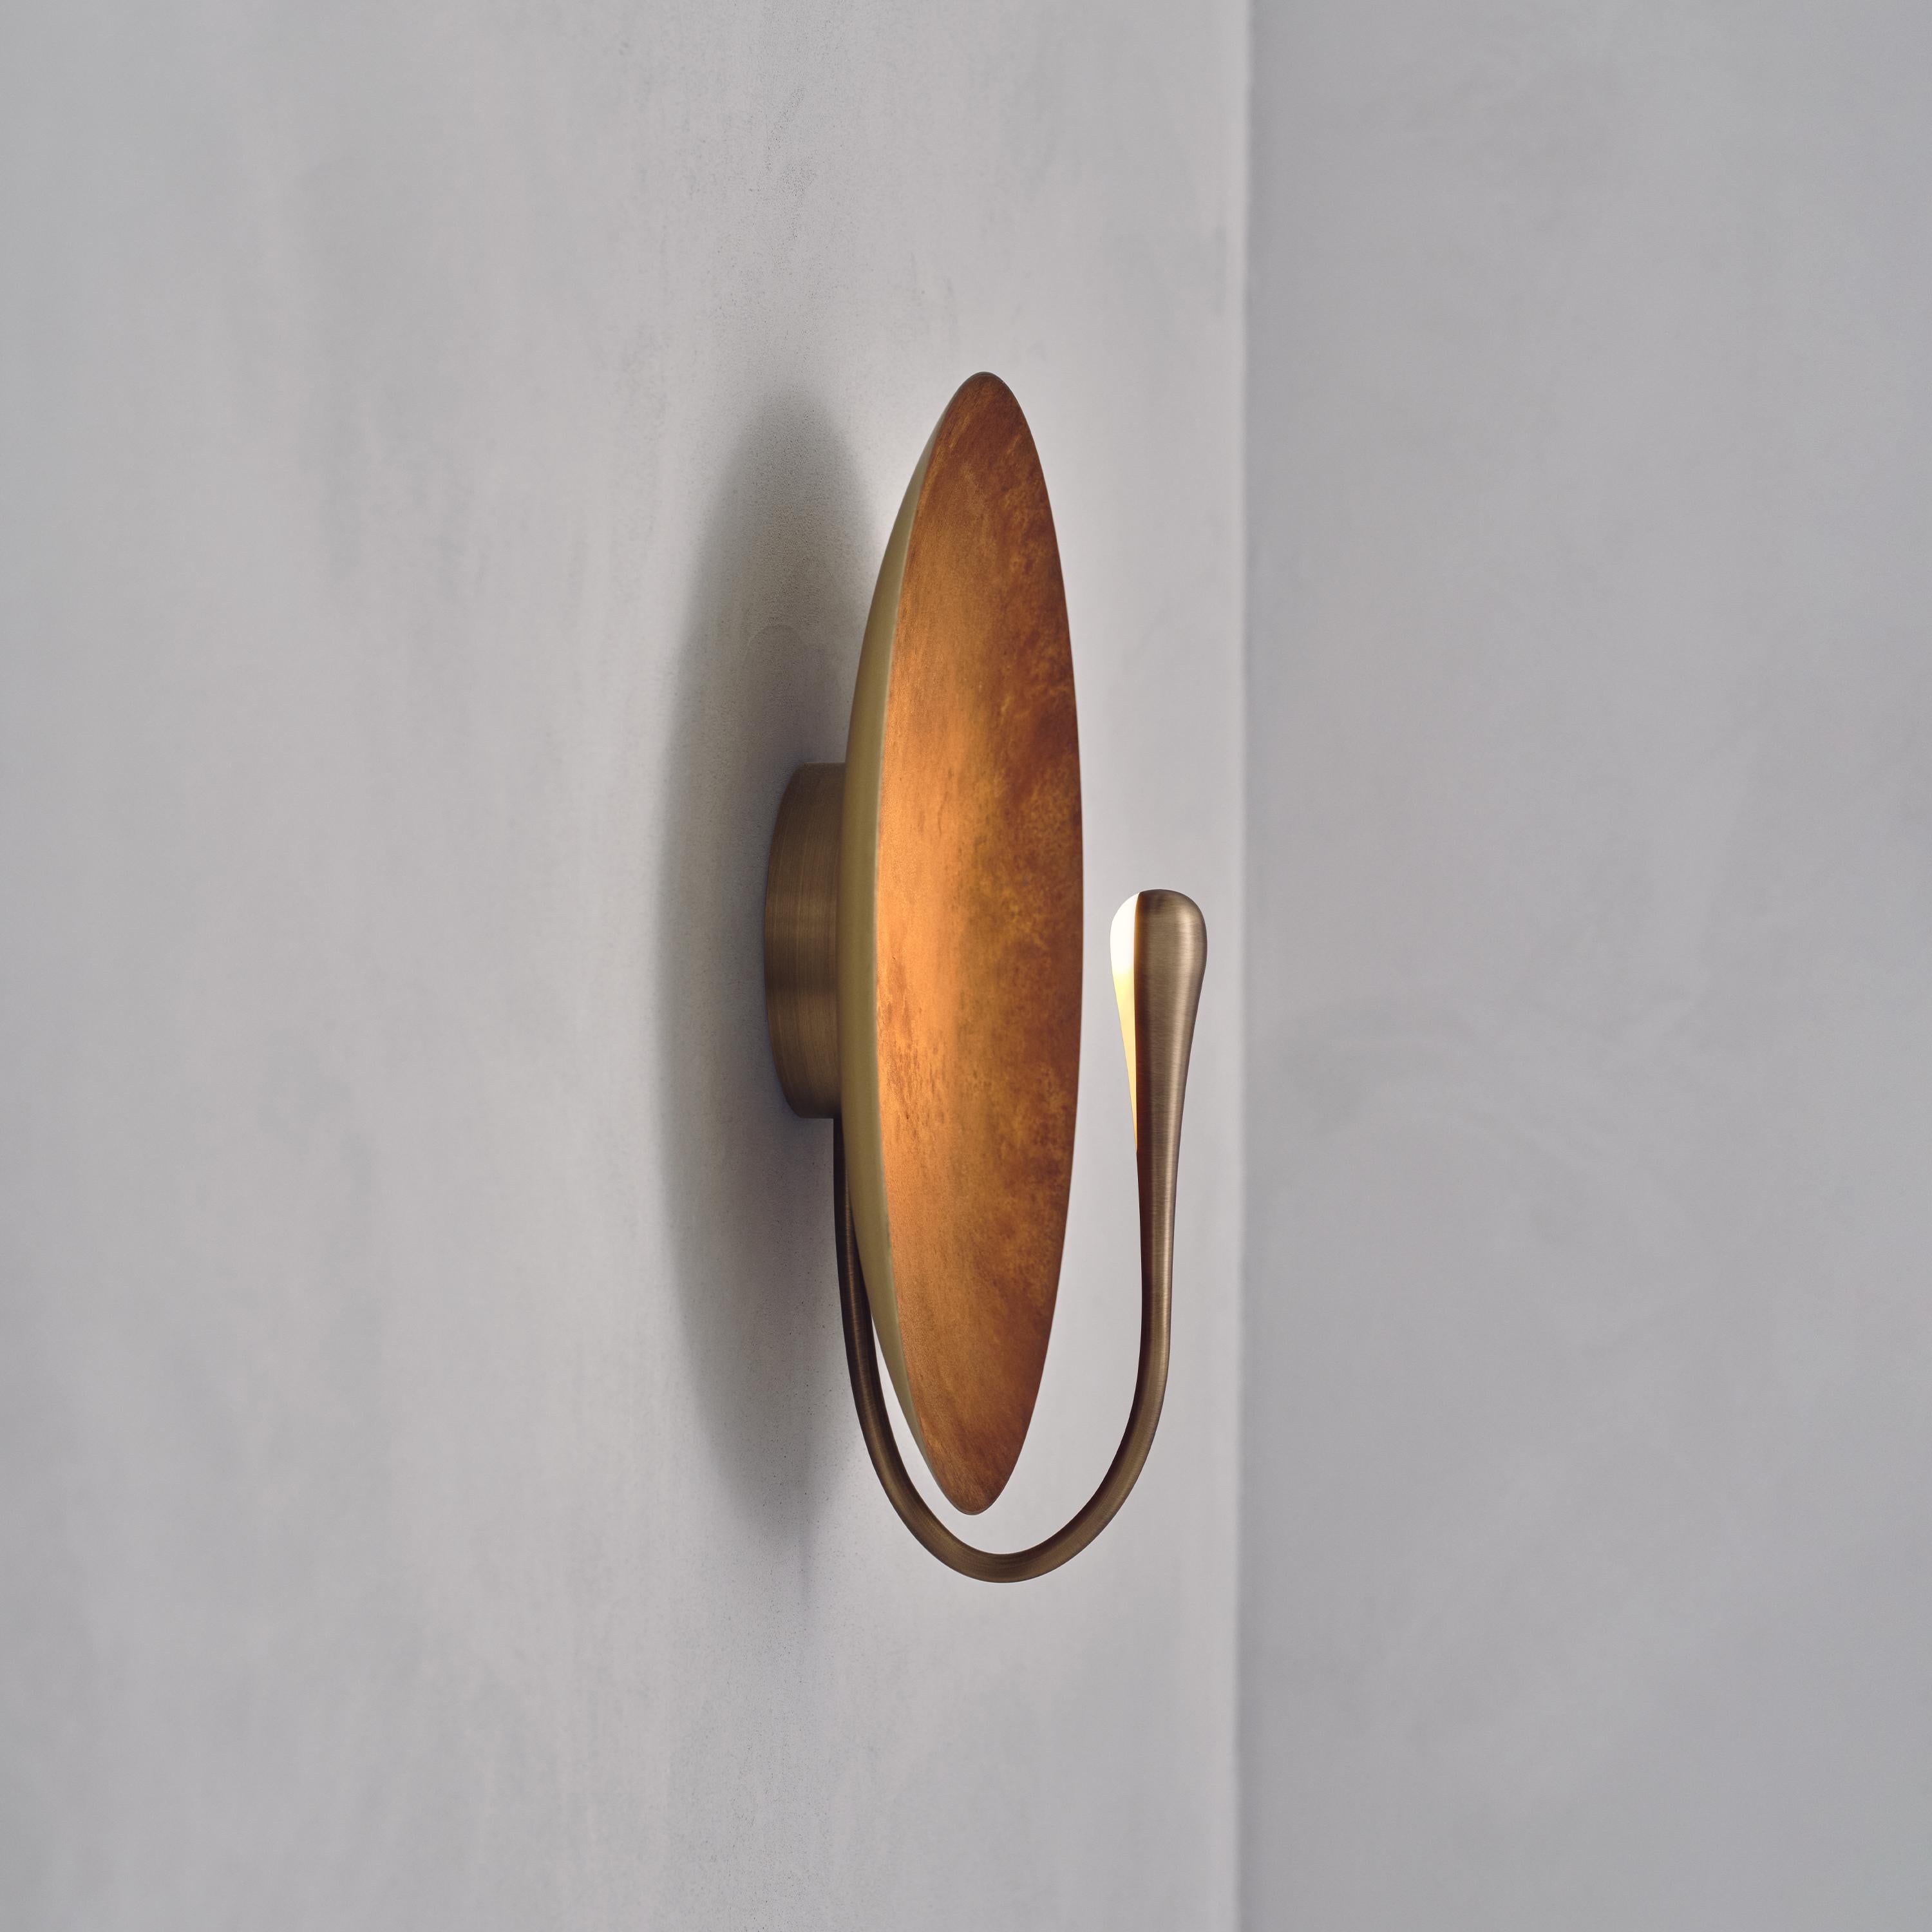 'Cosmic Rust' Artisan Handmade Rust Patinated Brass Wall Light Sconce In New Condition For Sale In London, GB